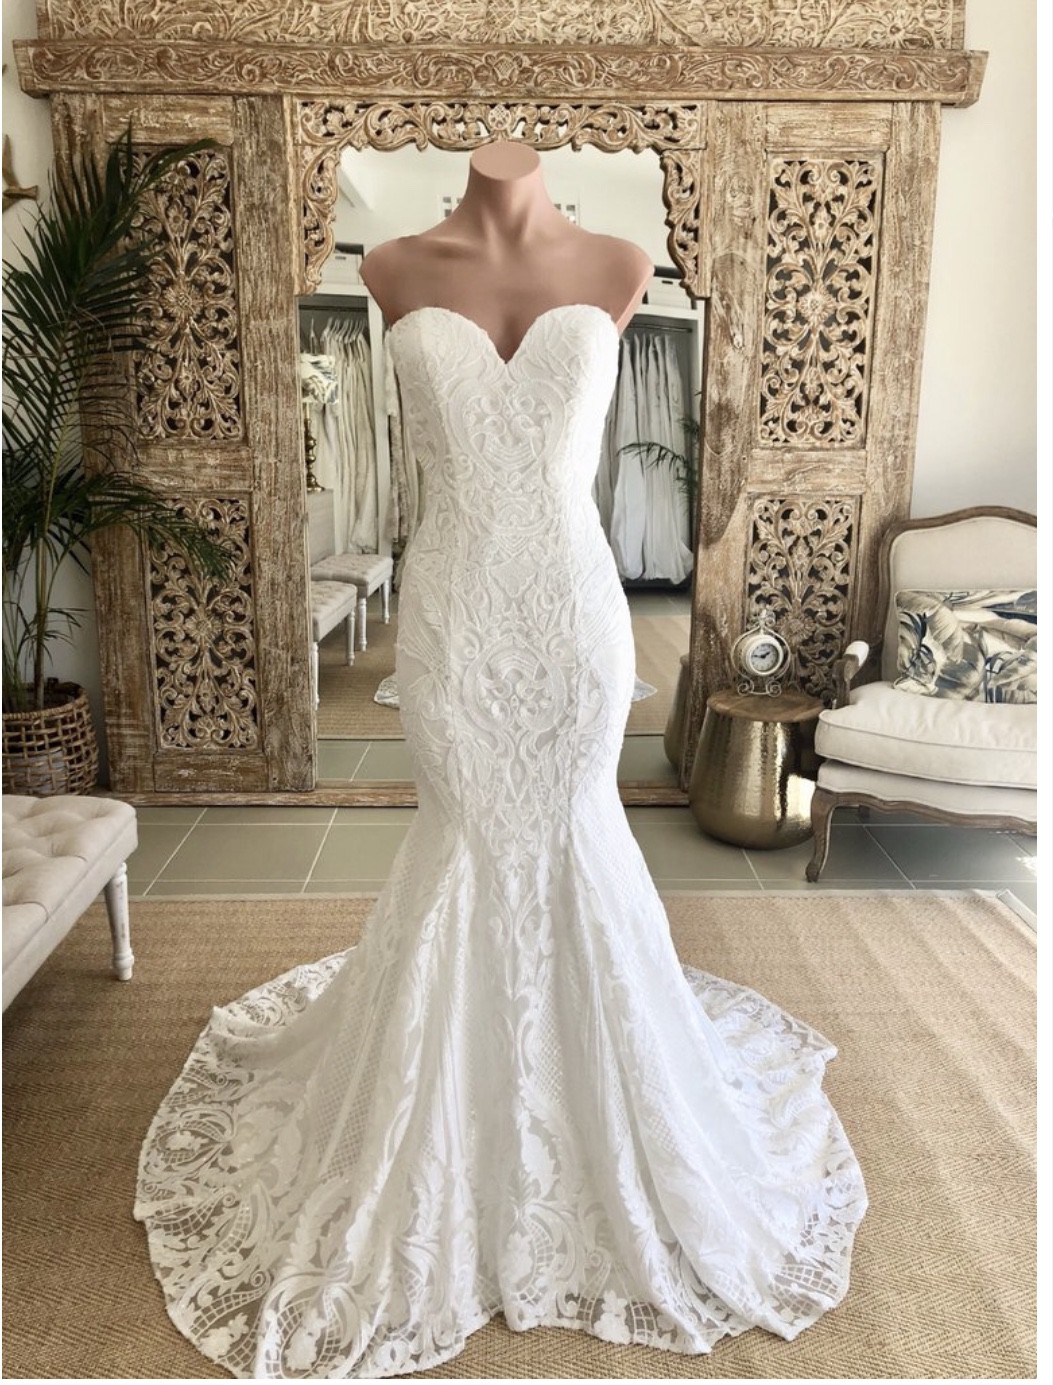 Heart | The GC Bridal Lounge